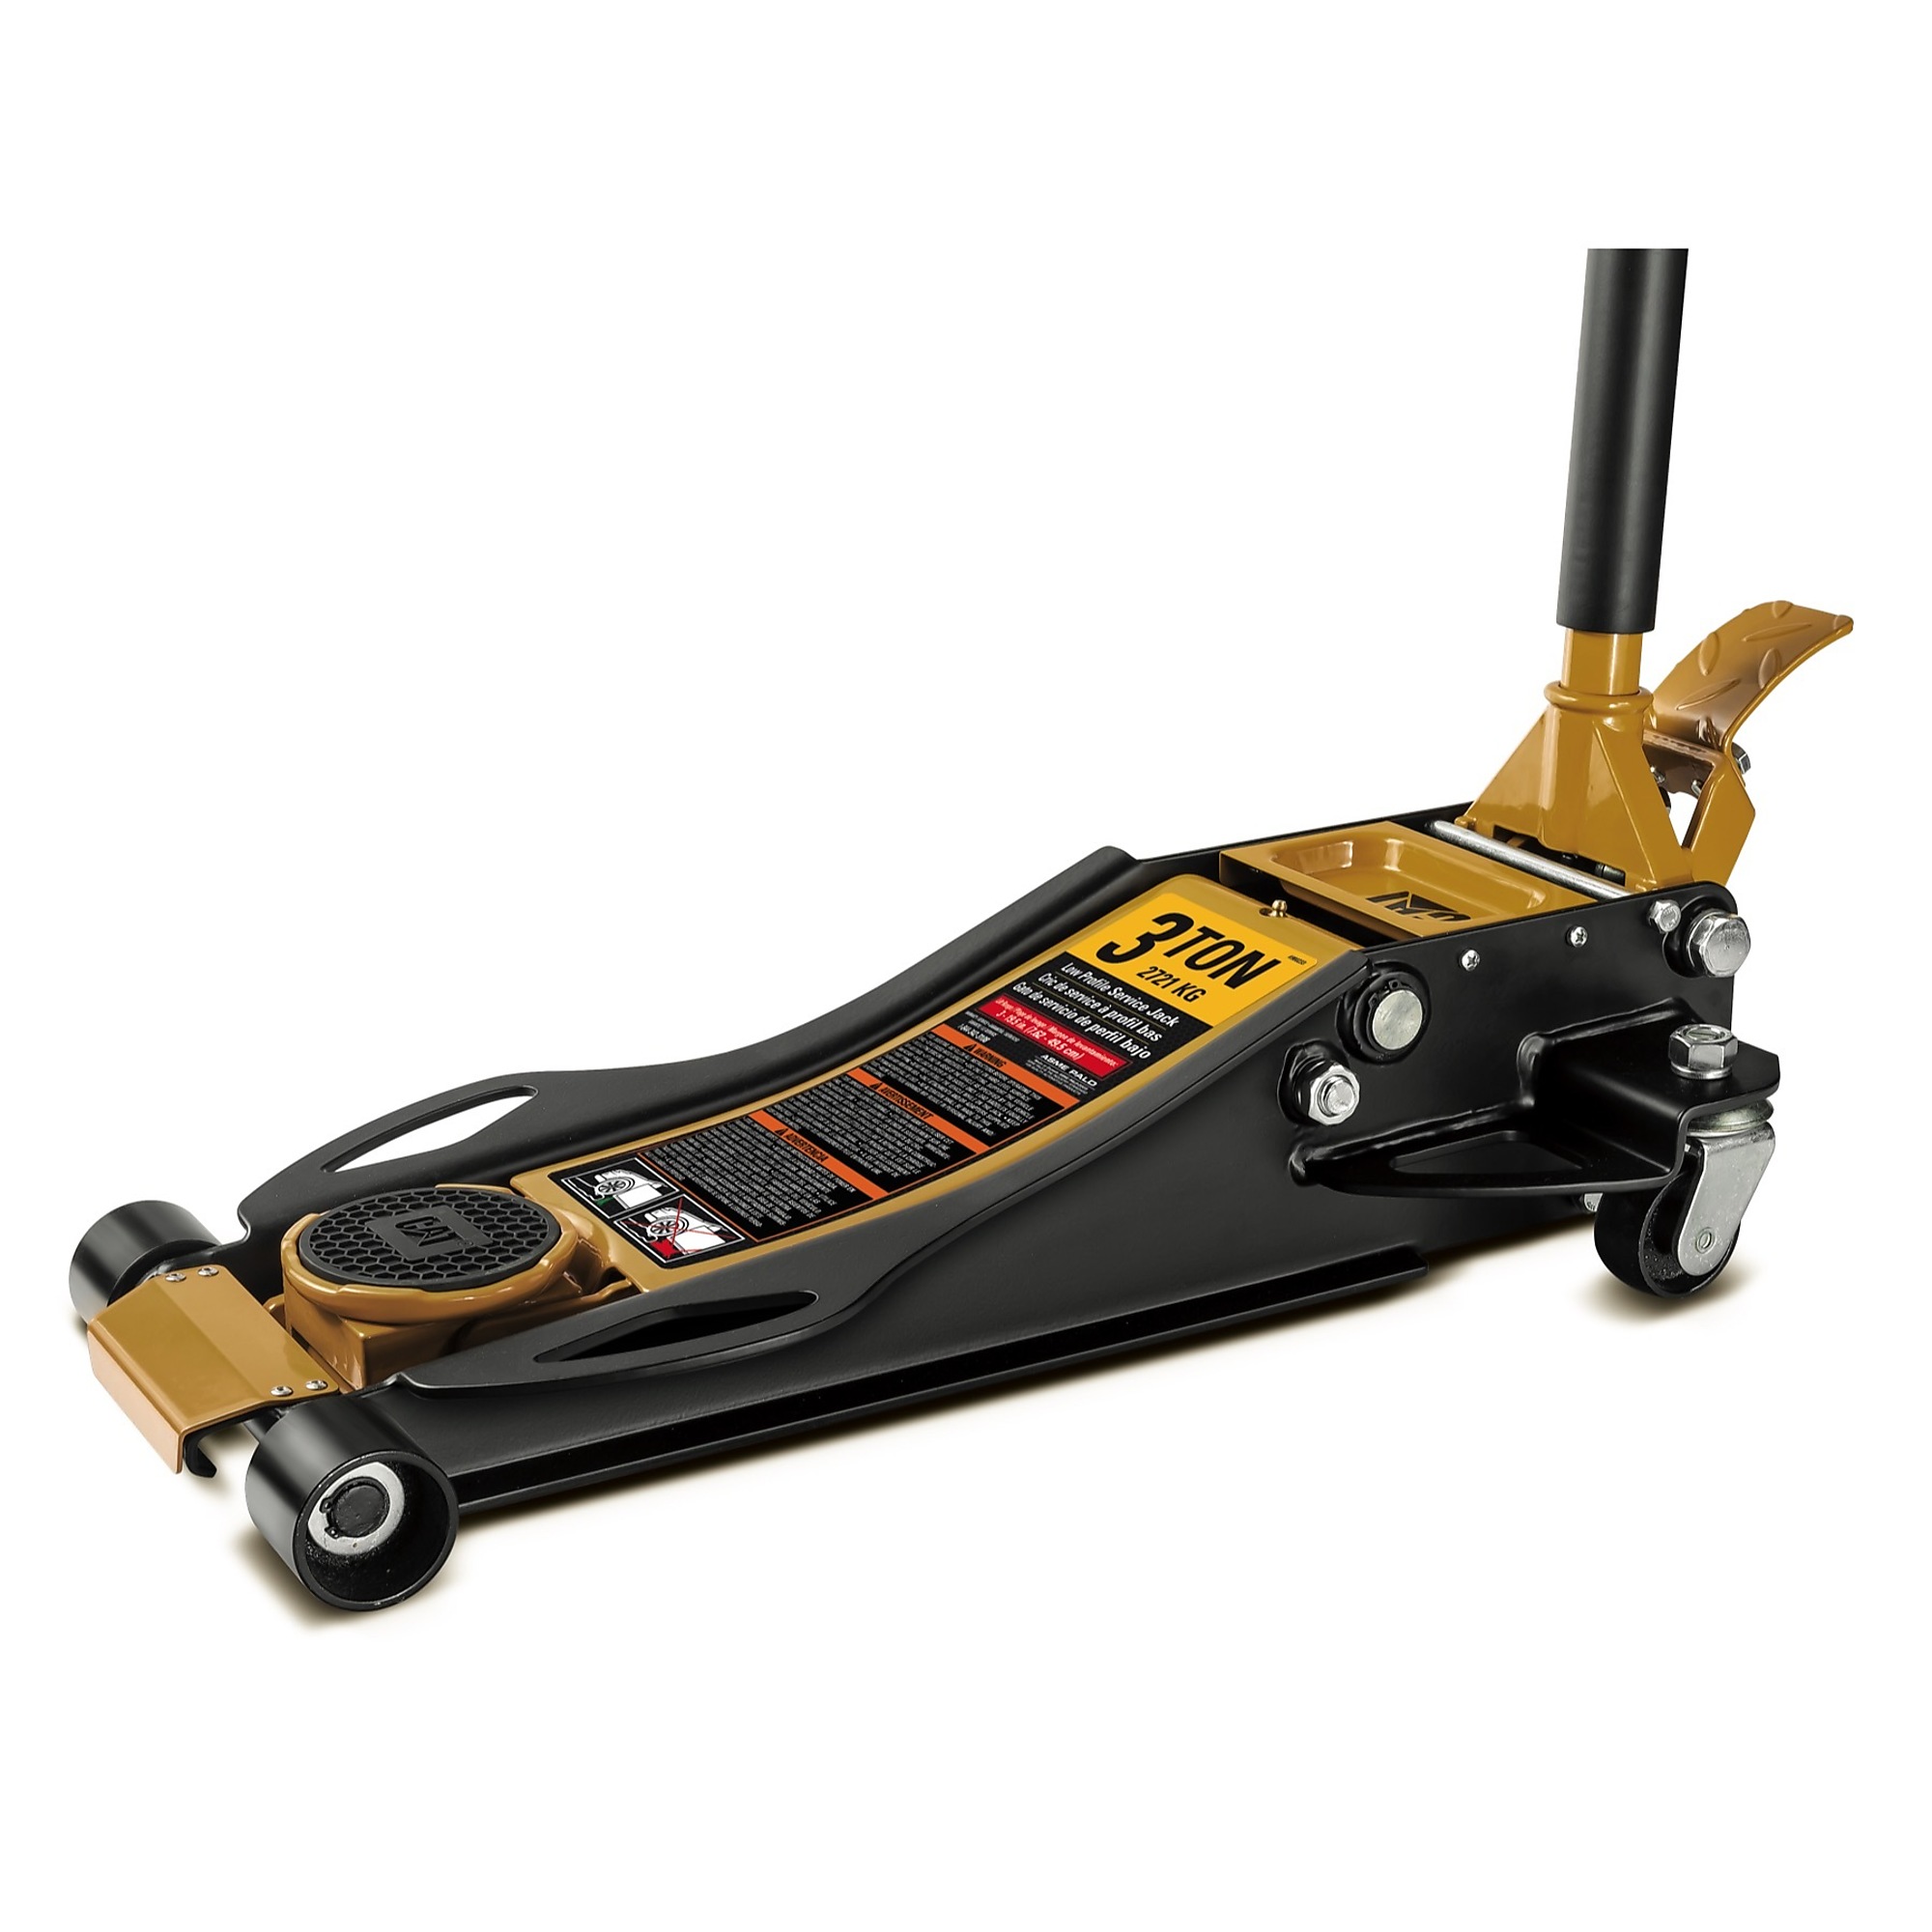 Caterpillar, 3 Ton Low Profile Service Jack, Lift Capacity 3 Tons, Max. Lift Height 19.5 in, Model 240109